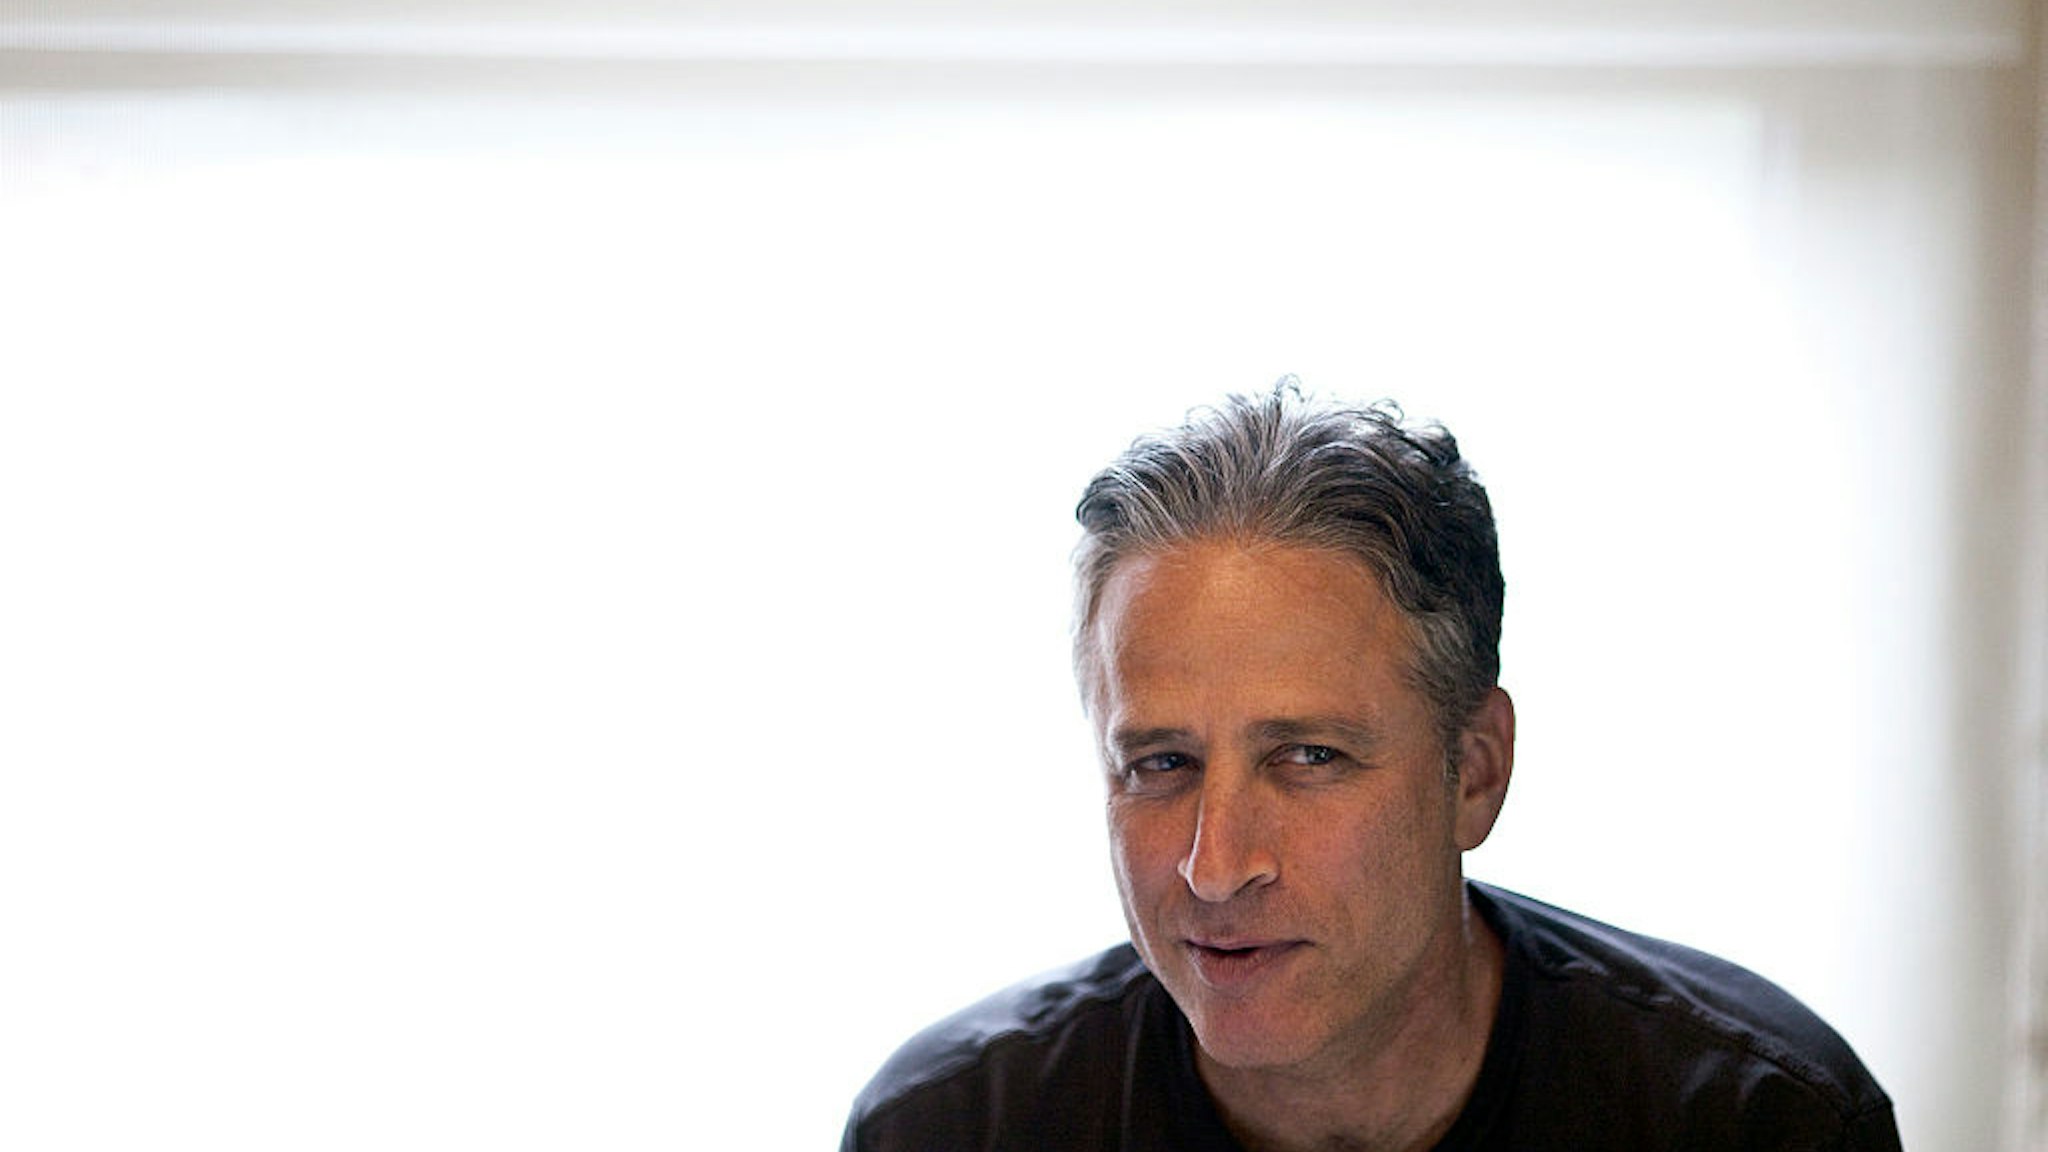 NEW YORK, NY - AUGUST 9 : Comedian Jon Stewart, host of Comedy Central's The Daily Show, works in his office on August 9, 2011 in New York. (Photo by Benjamin Lowy/Getty Images)